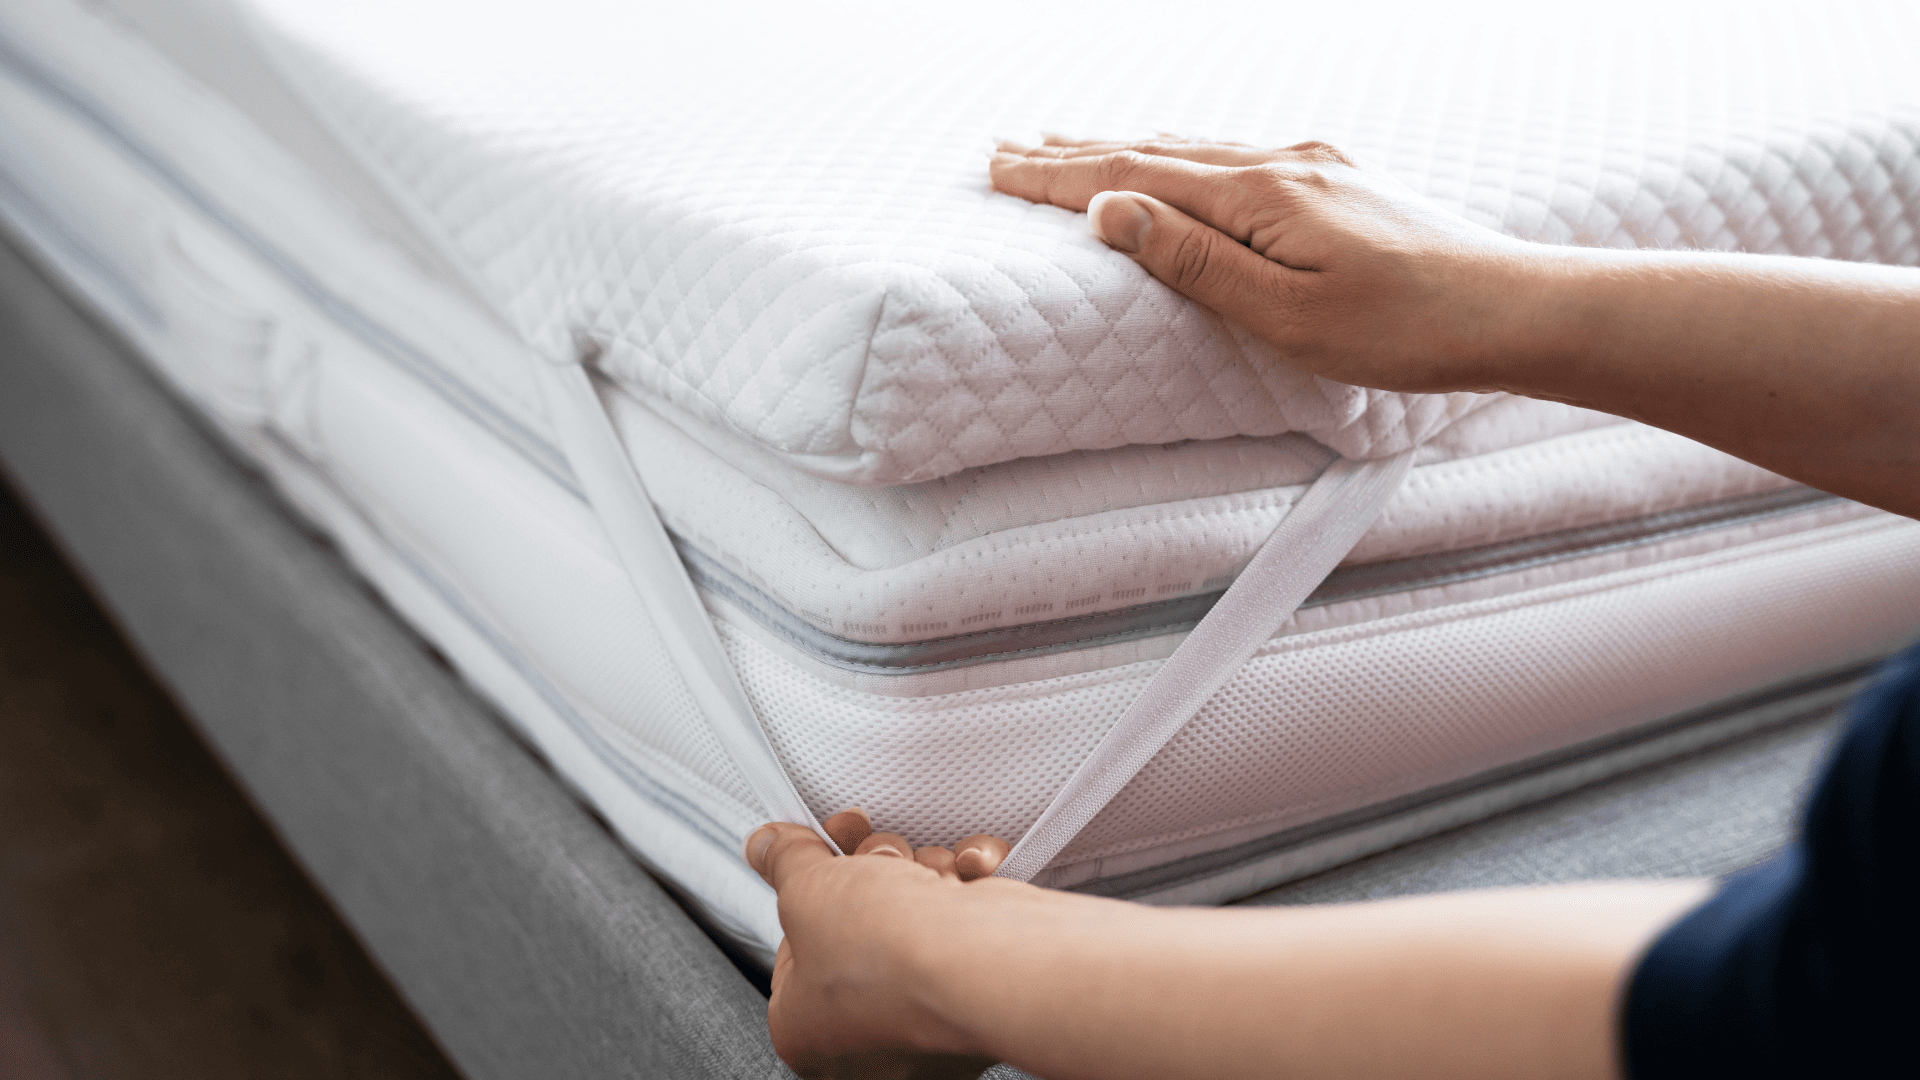 adjustable bed mattress thickness